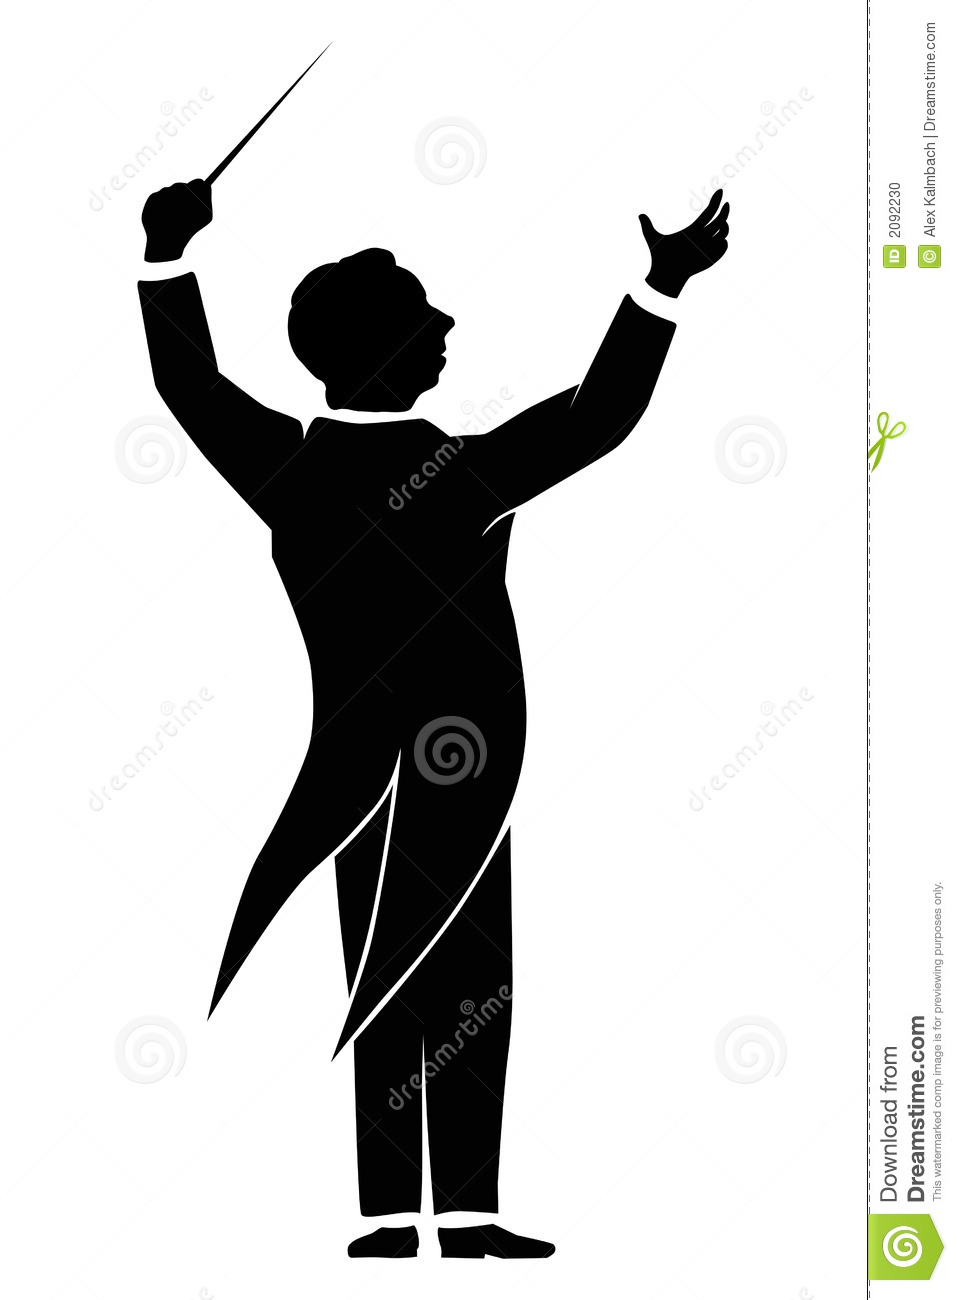 Music conductor clipart.